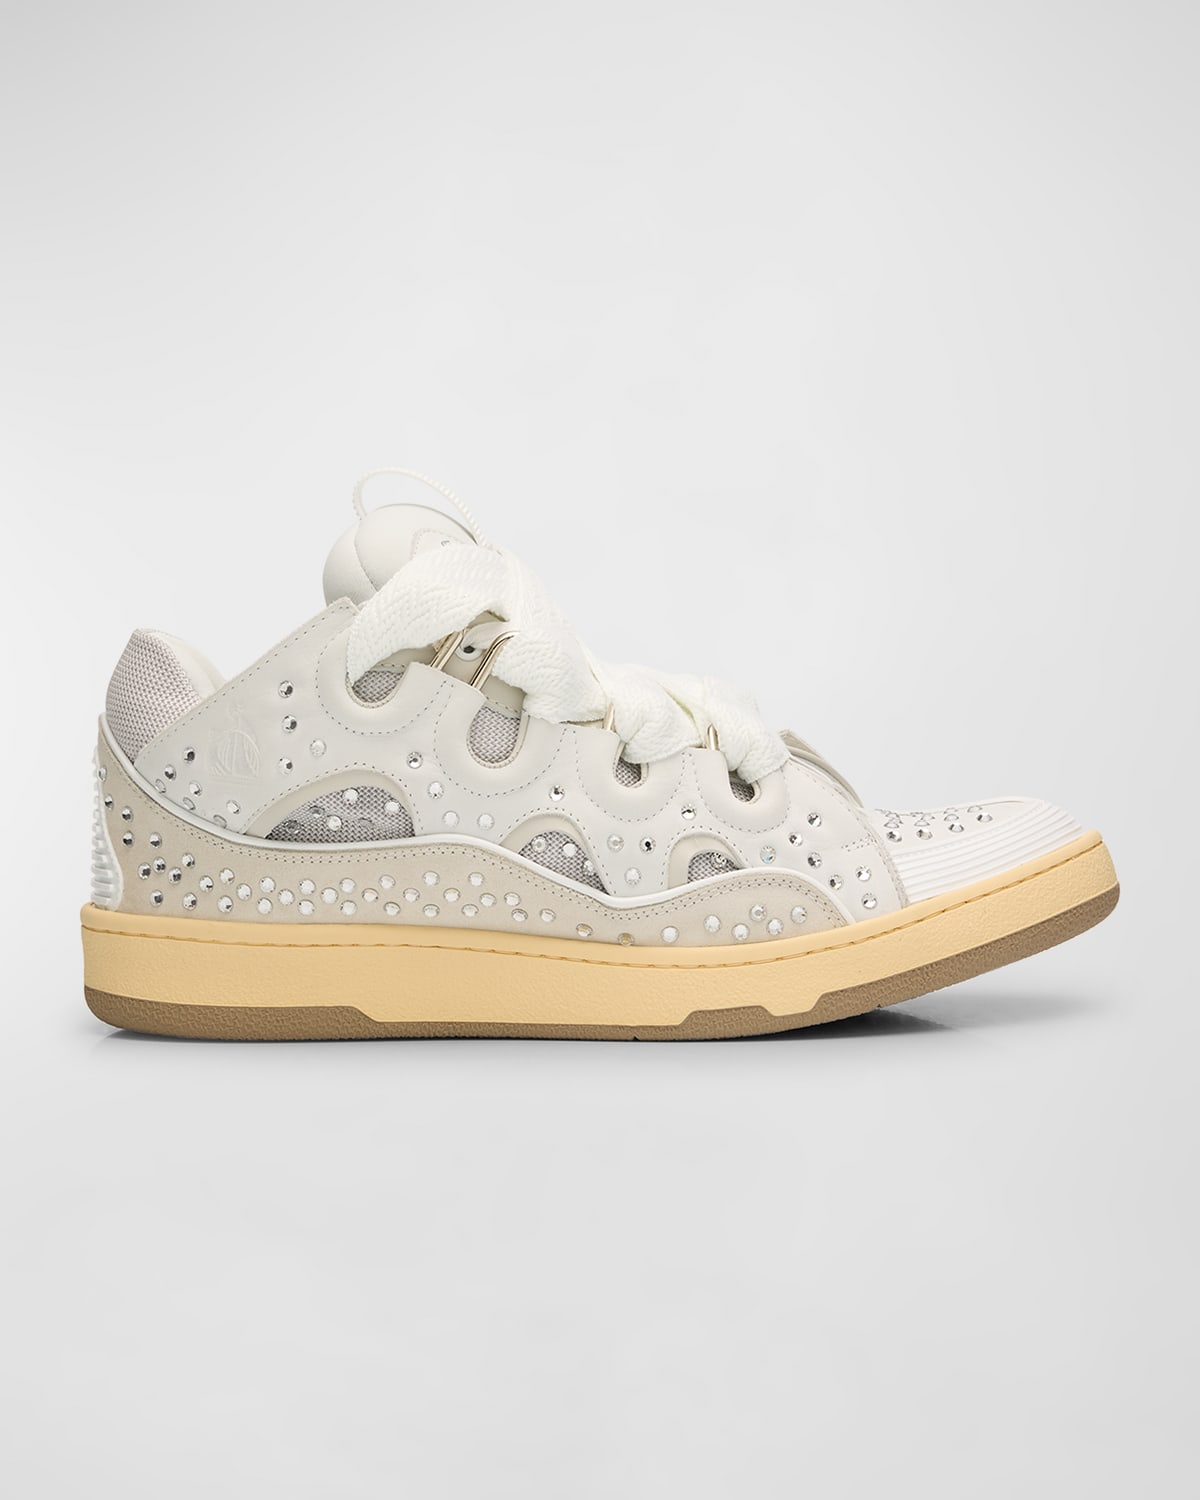 Lanvin Men's Leather And Crystal Curb Fashion Sneakers In 041 - Moon